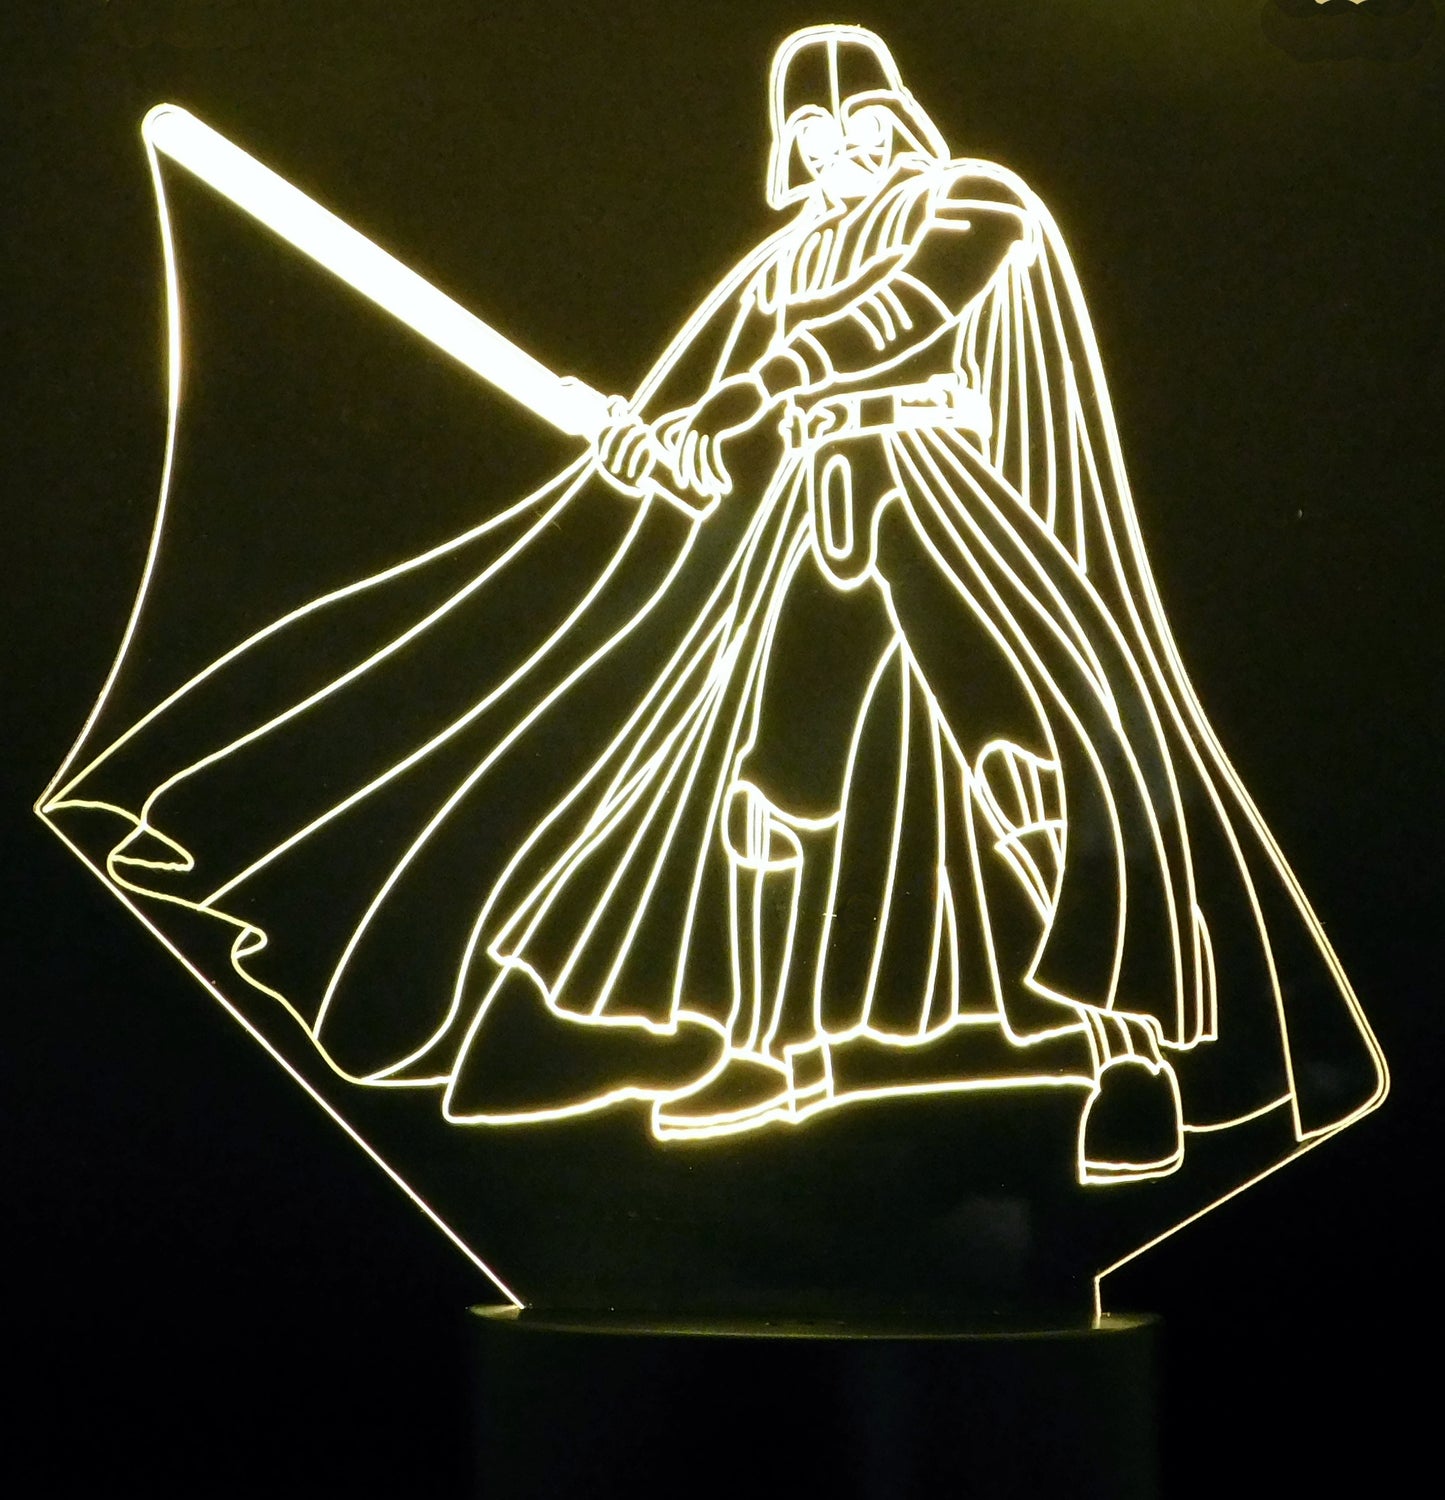 Darth Vader With Sword 3-D Optical Illusion LED Desk, Table, Night Lamp